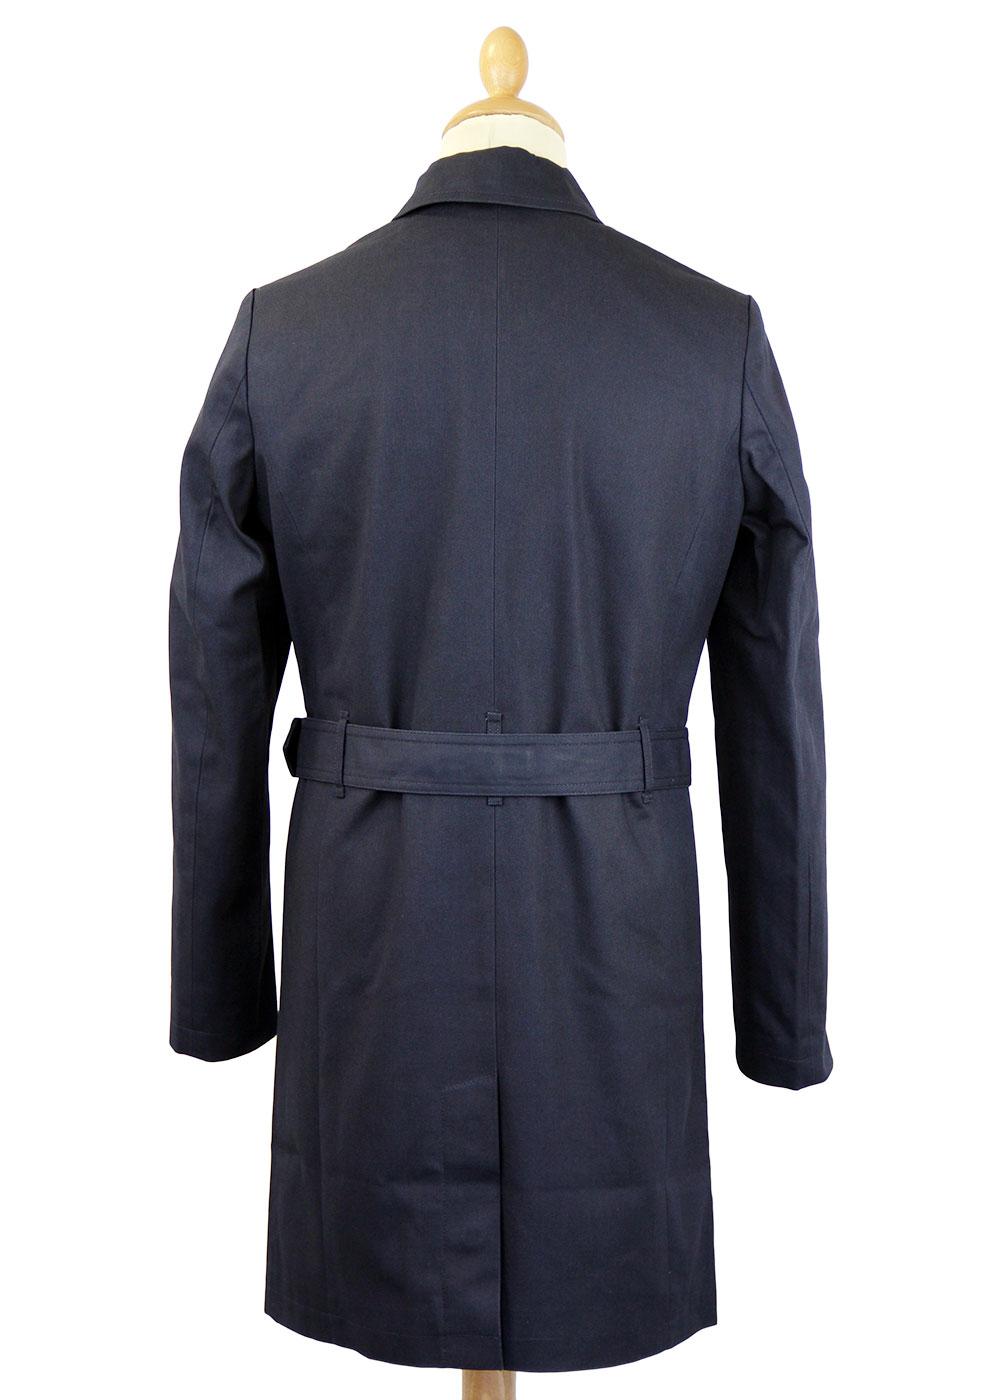 Ben Sherman Retro Mod Double Breasted Twill Trench Coat Navy